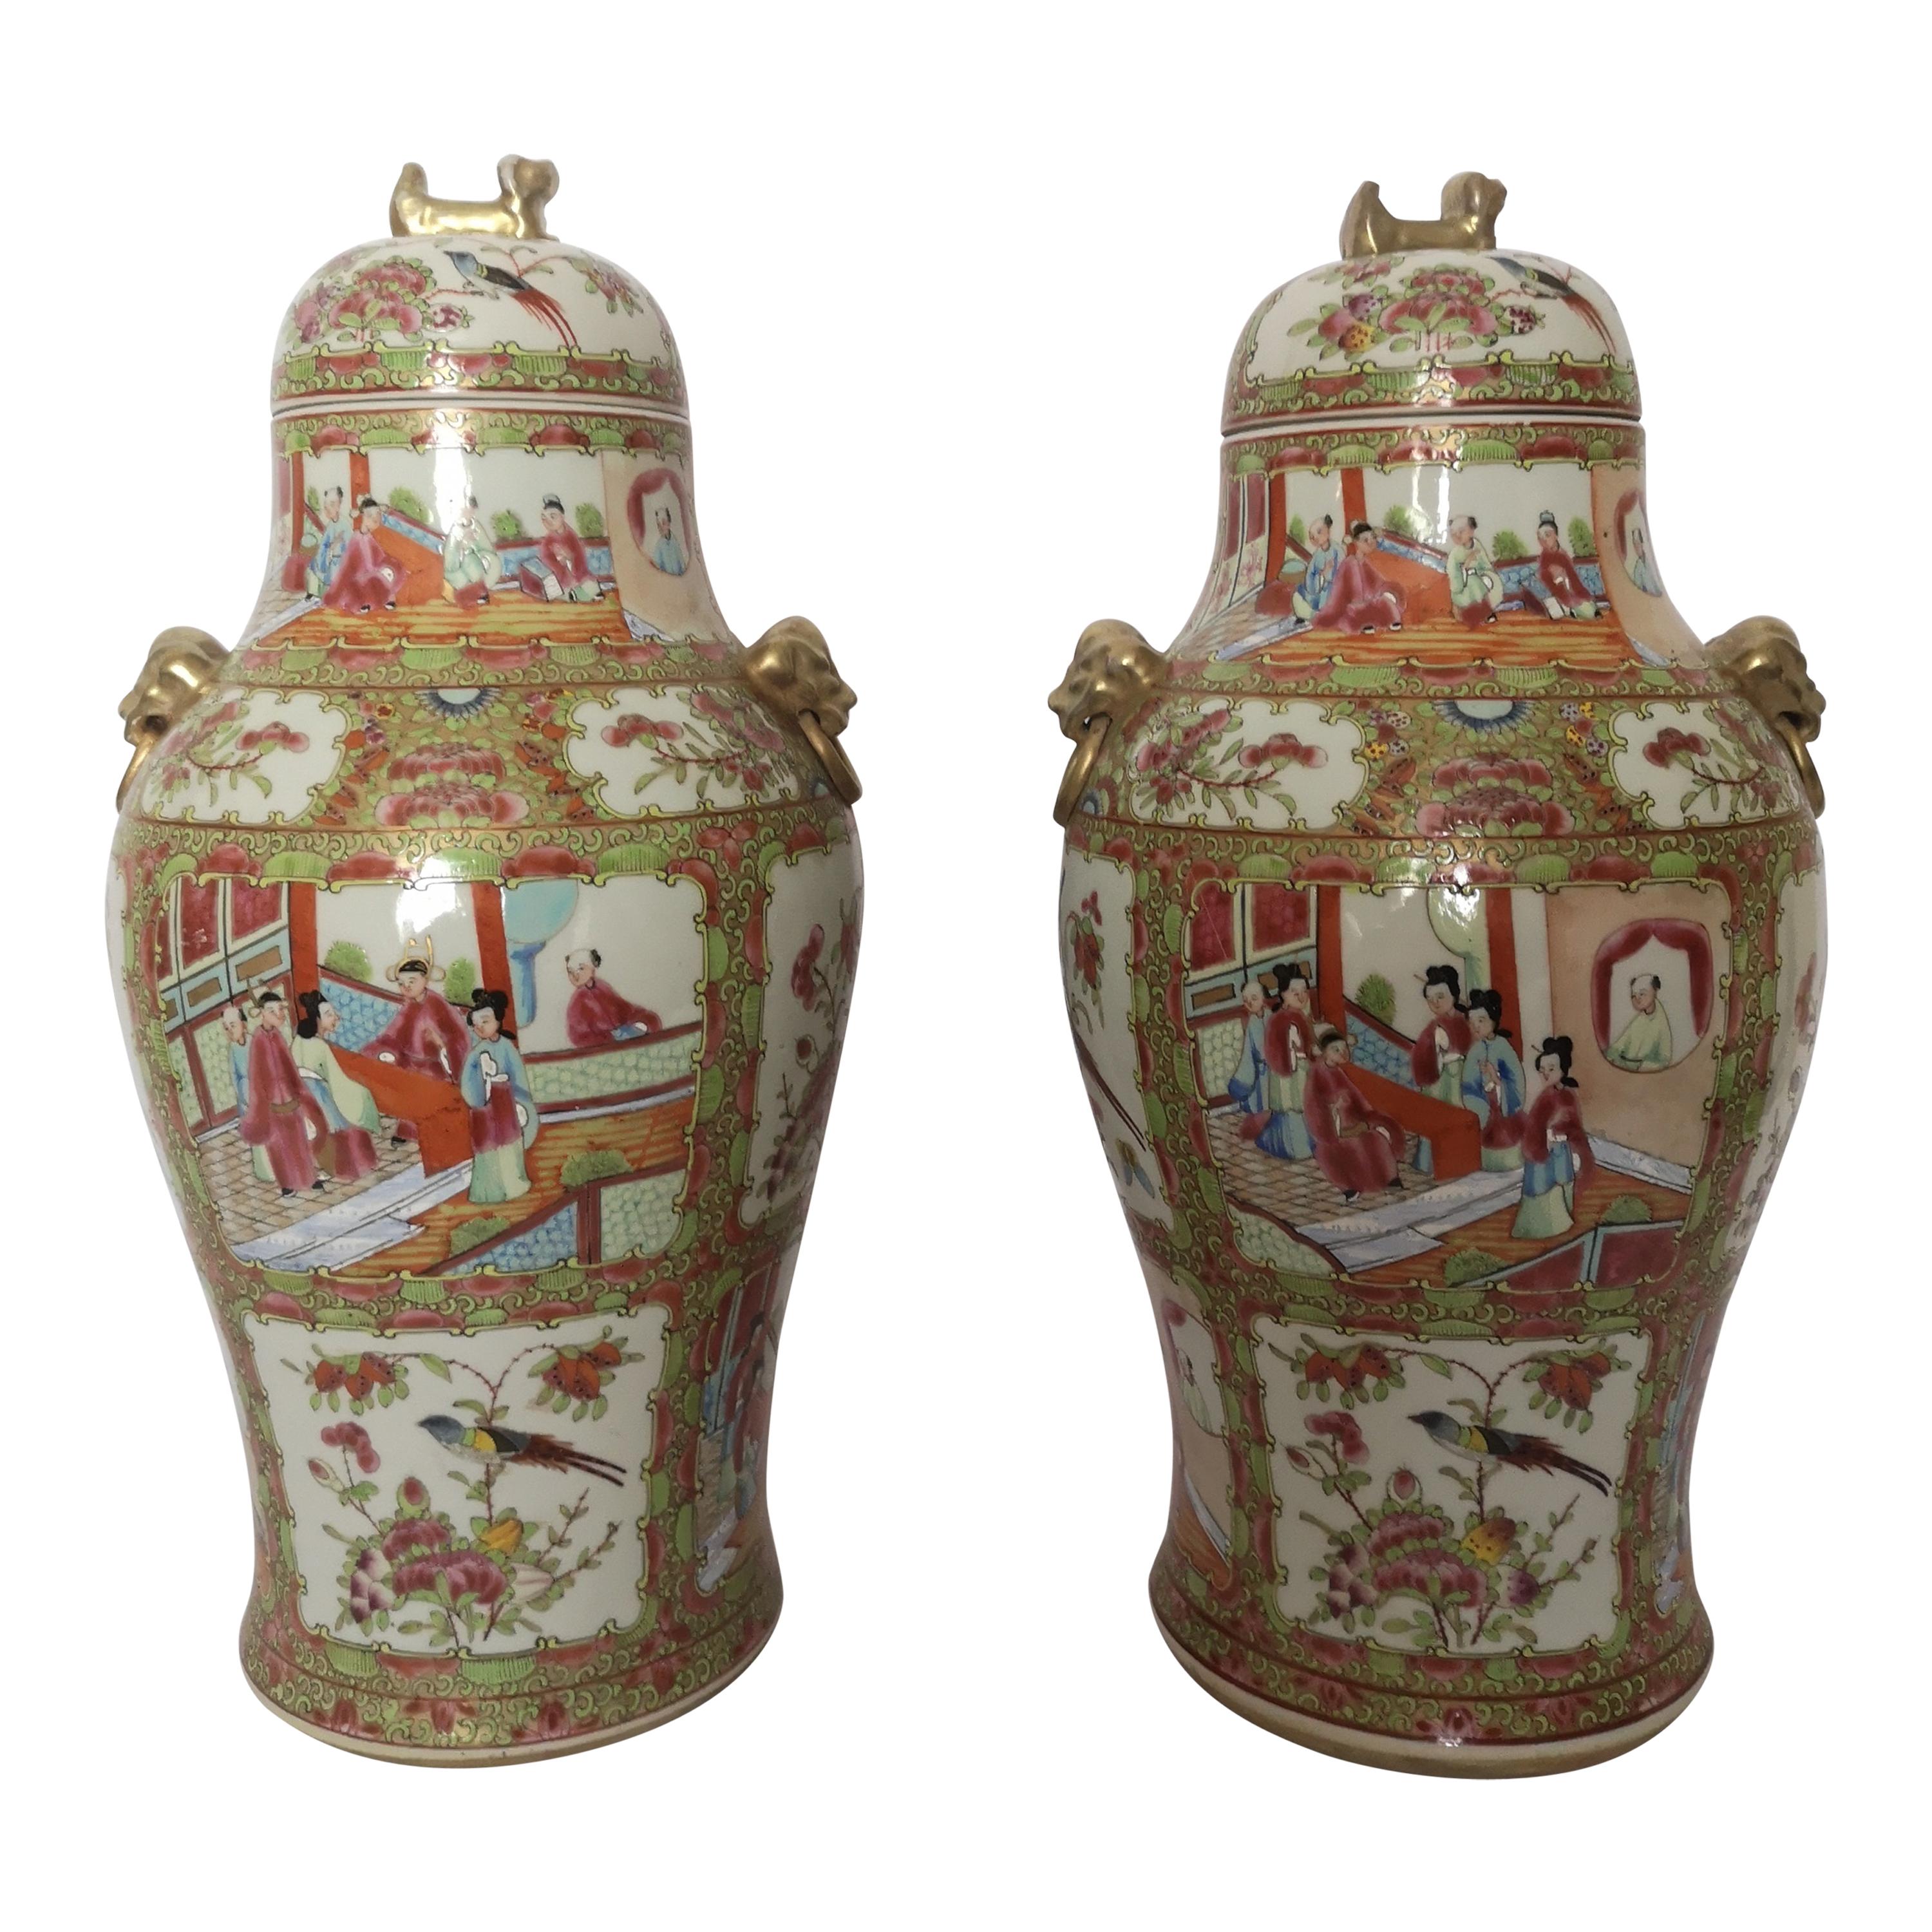 Pair of 19th Century Cantonese Famille Rose Chinese Porcelain Vases